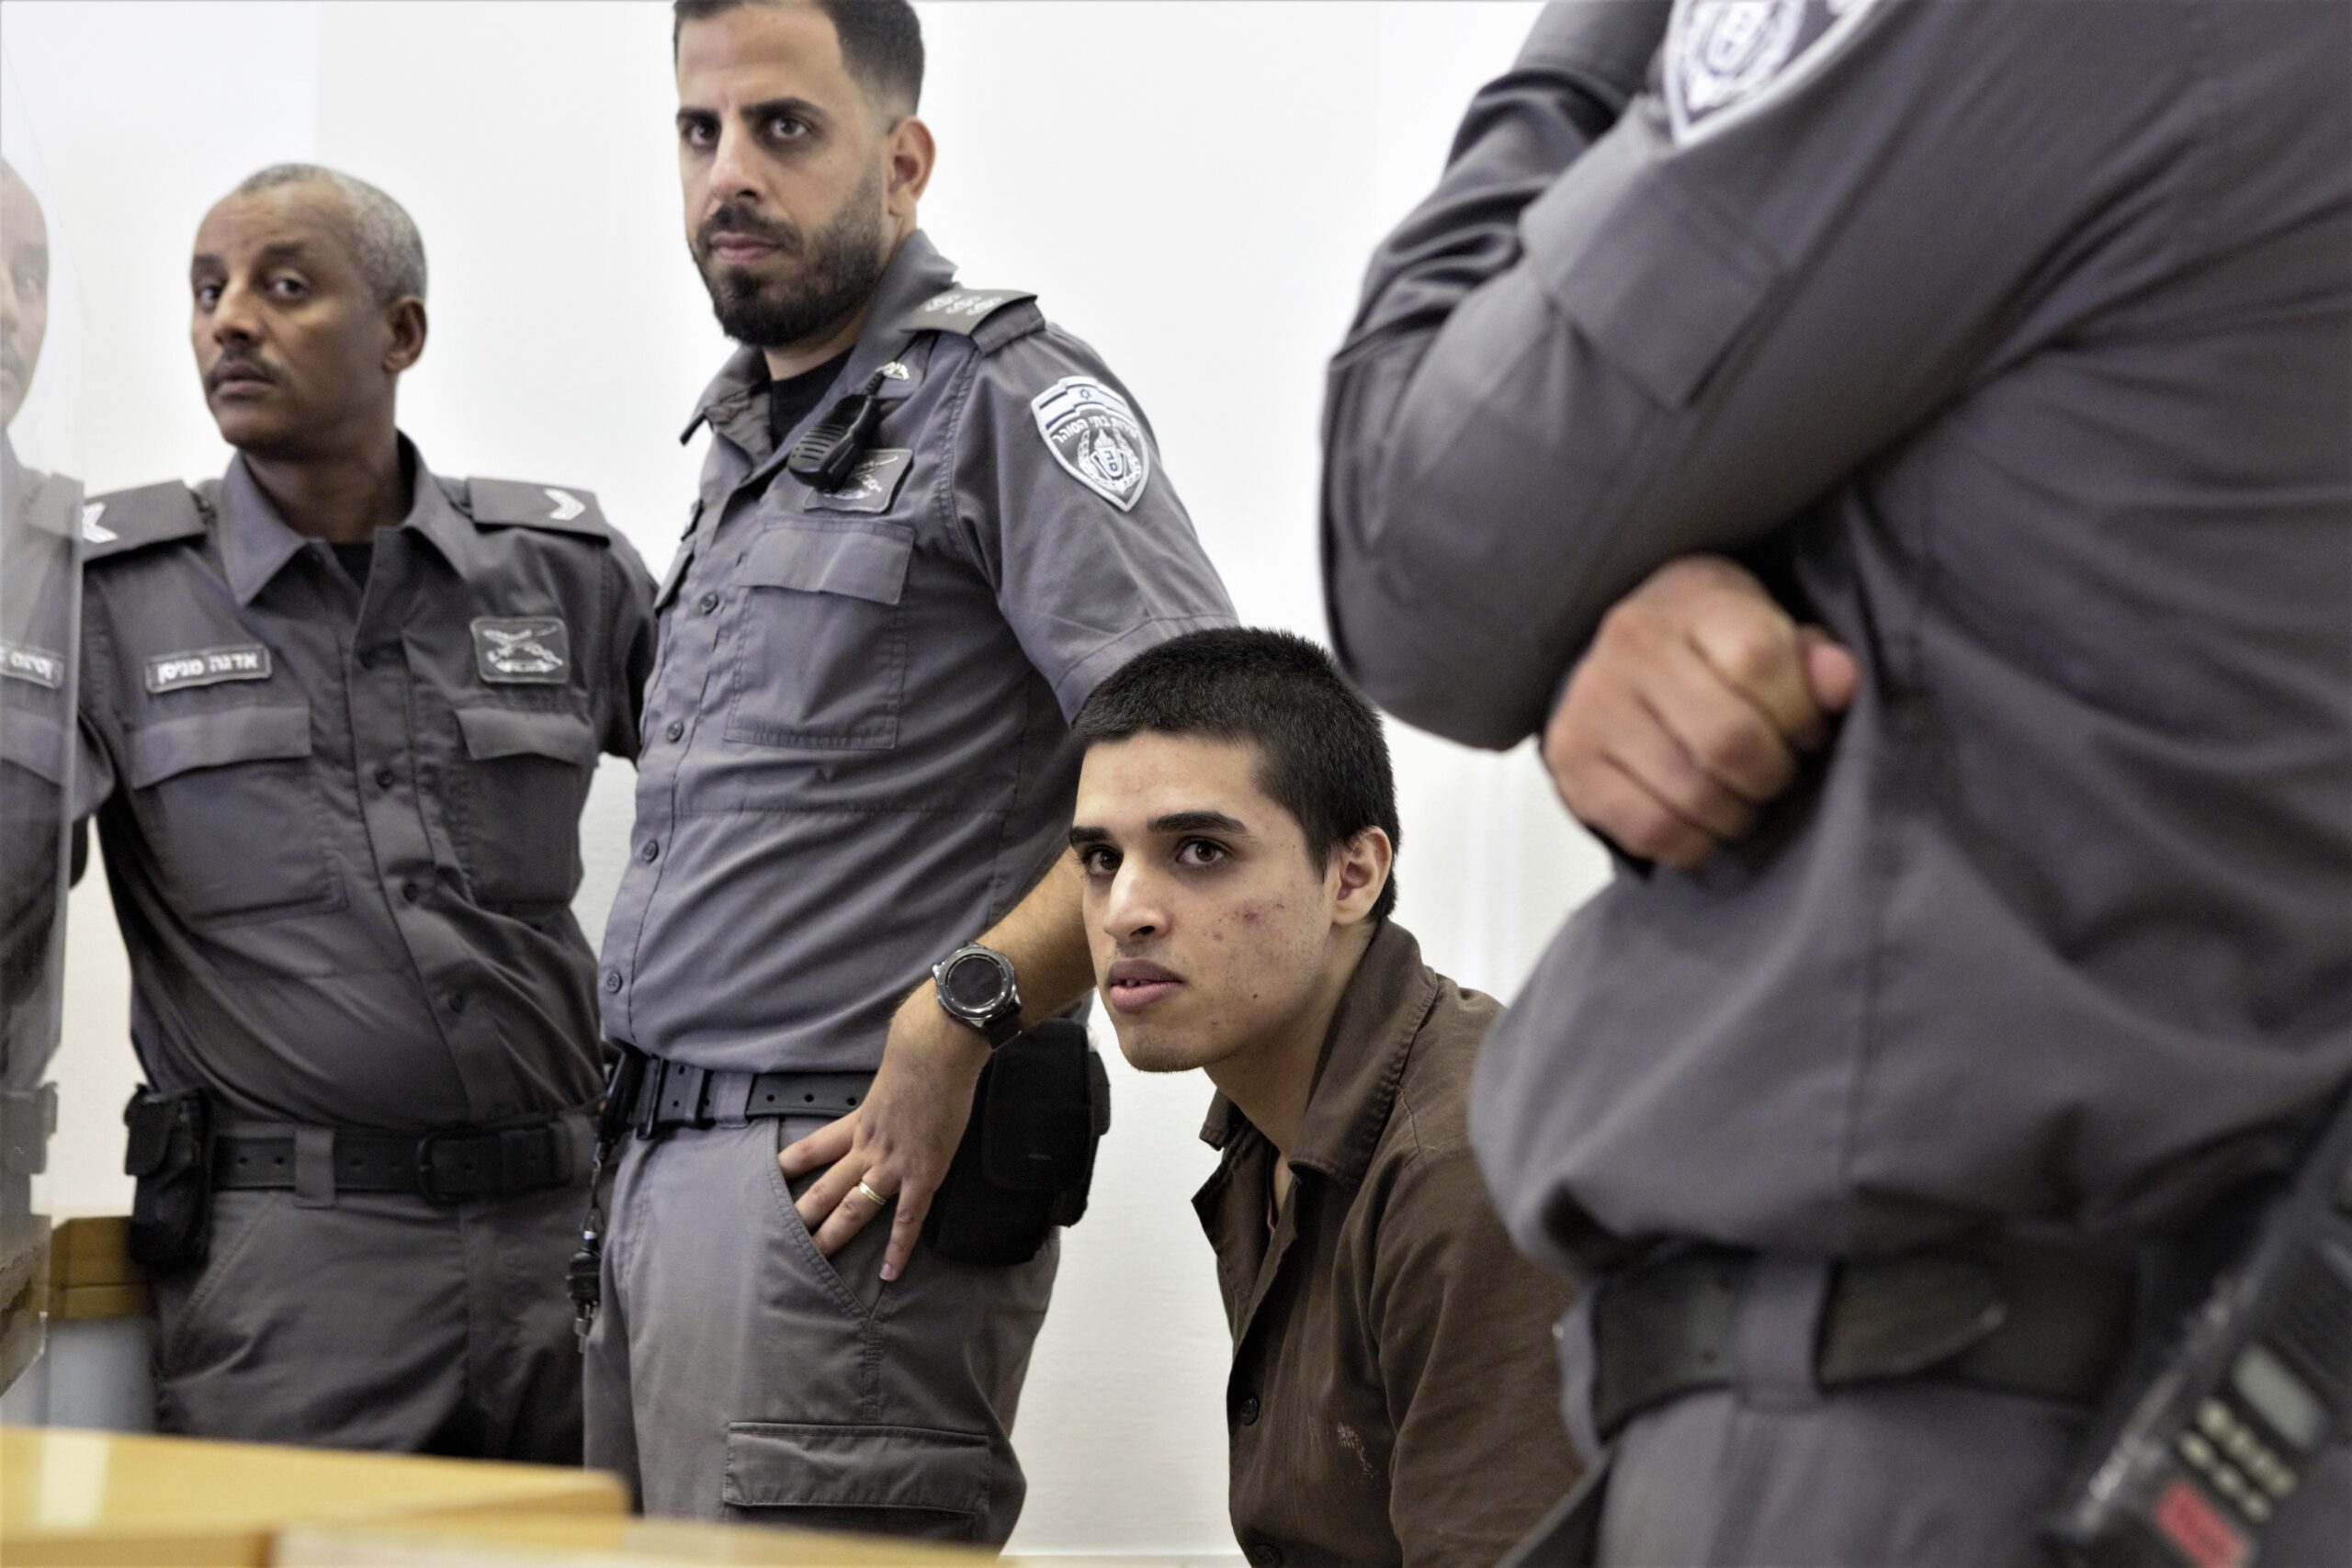 ISRAEL/OPT: After nearly two years in solitary confinement, Ahmad Manasra too ill to attend his hearing